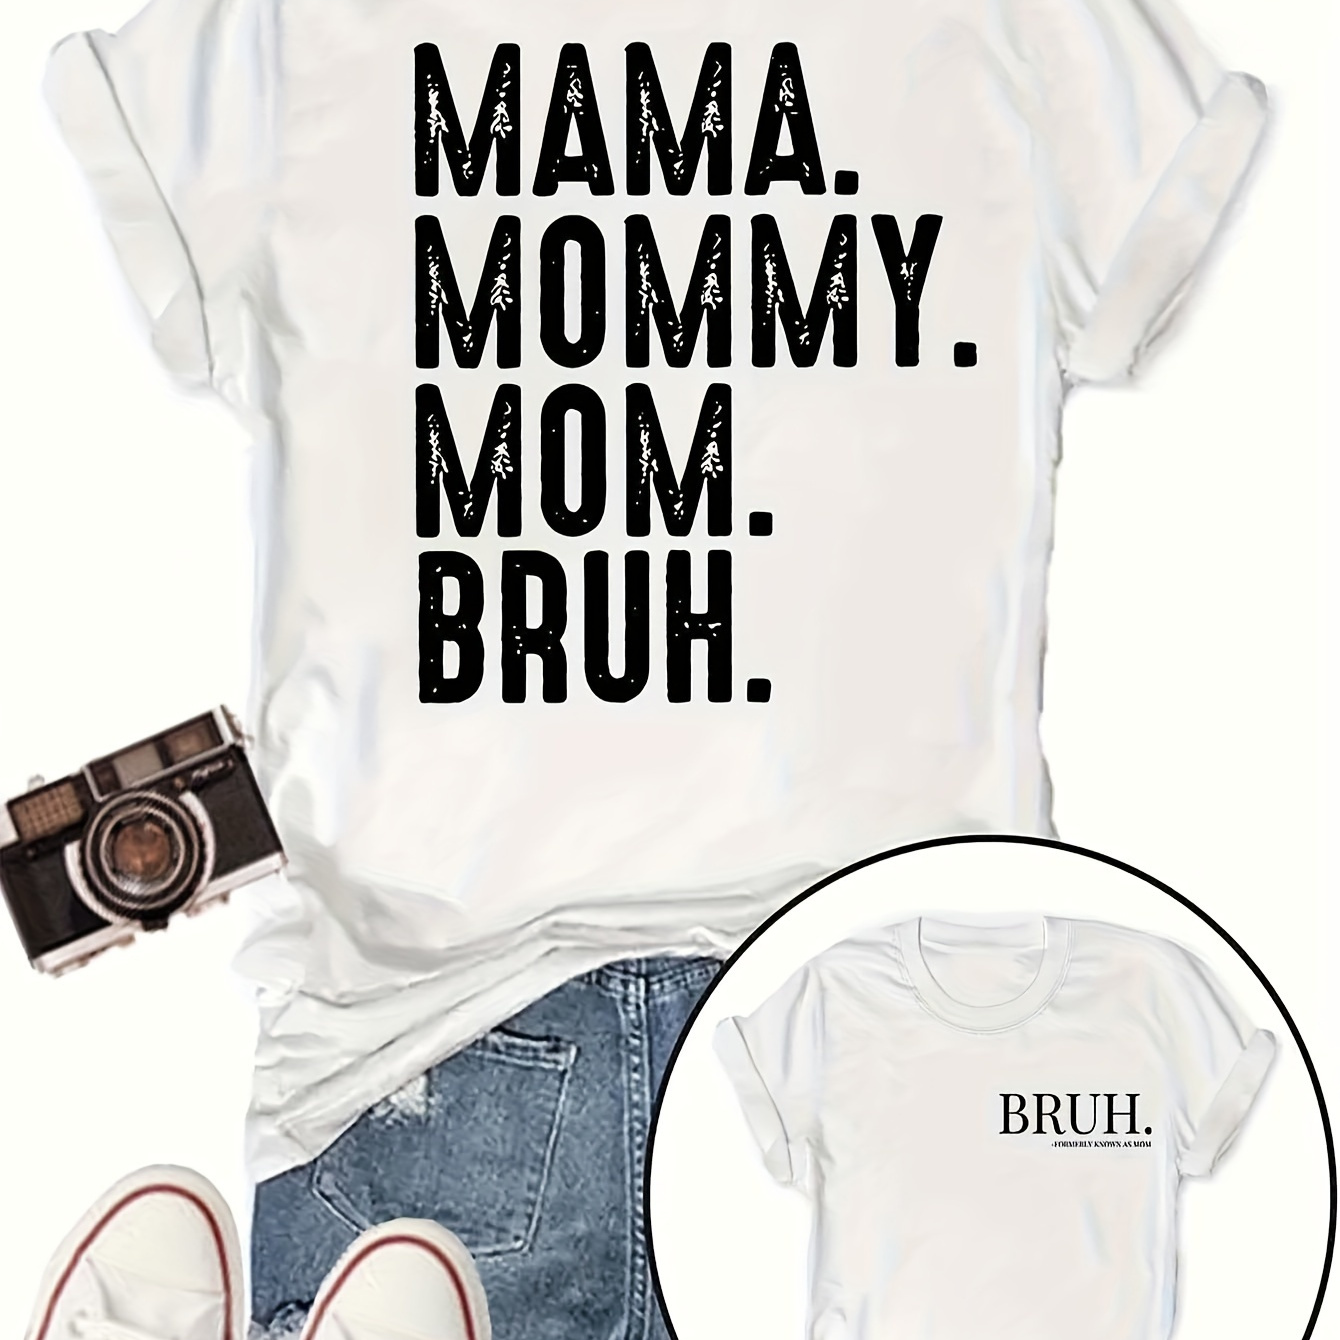 

Mama Mommy Mom Bruh Letter Print T-shirt, Casual Crew Neck Short Sleeve Top For Spring & Summer, Women's Clothing